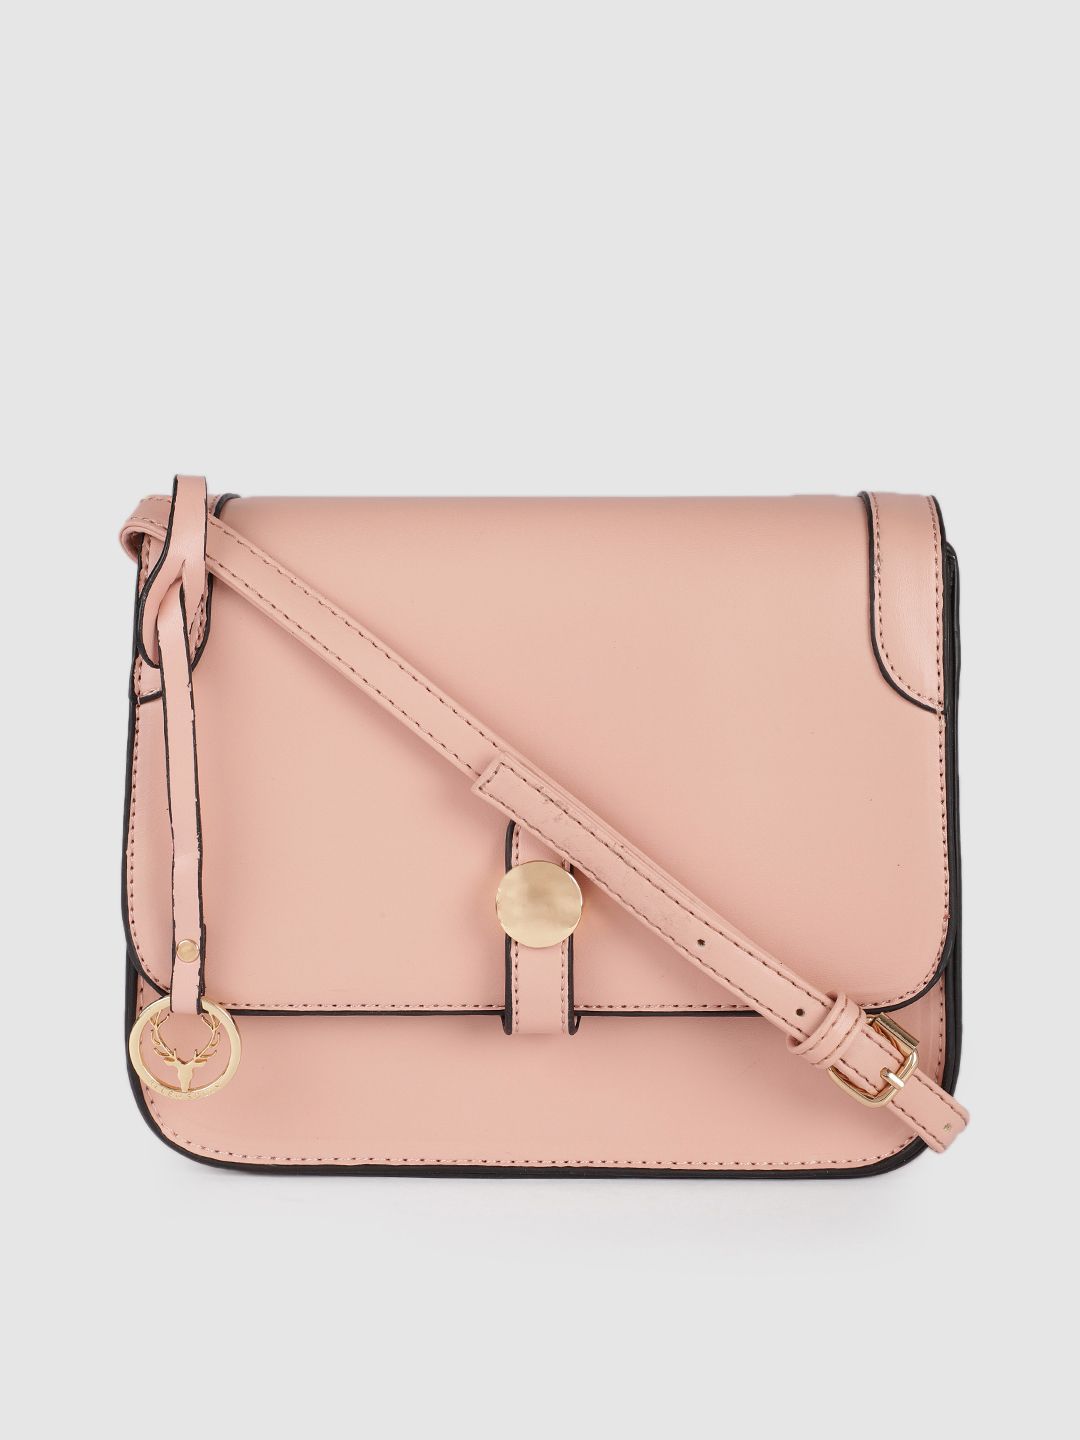 Allen Solly Pink PU Structured Sling Bag Price in India